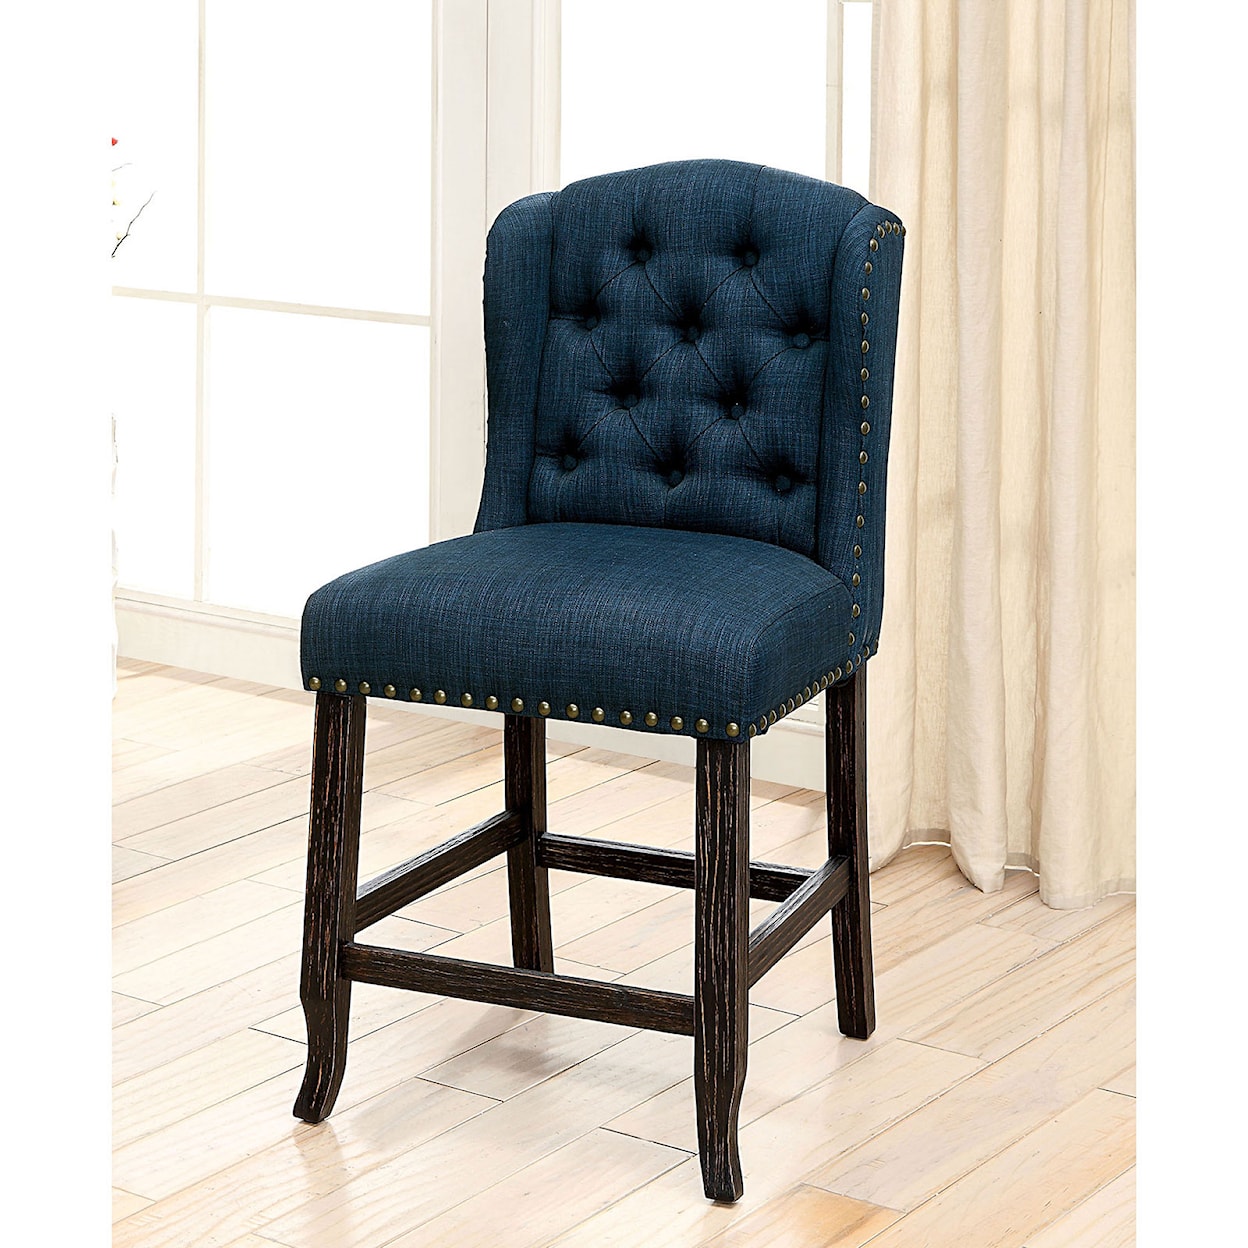 Furniture of America Sania III Counter Height Wing Back Chair